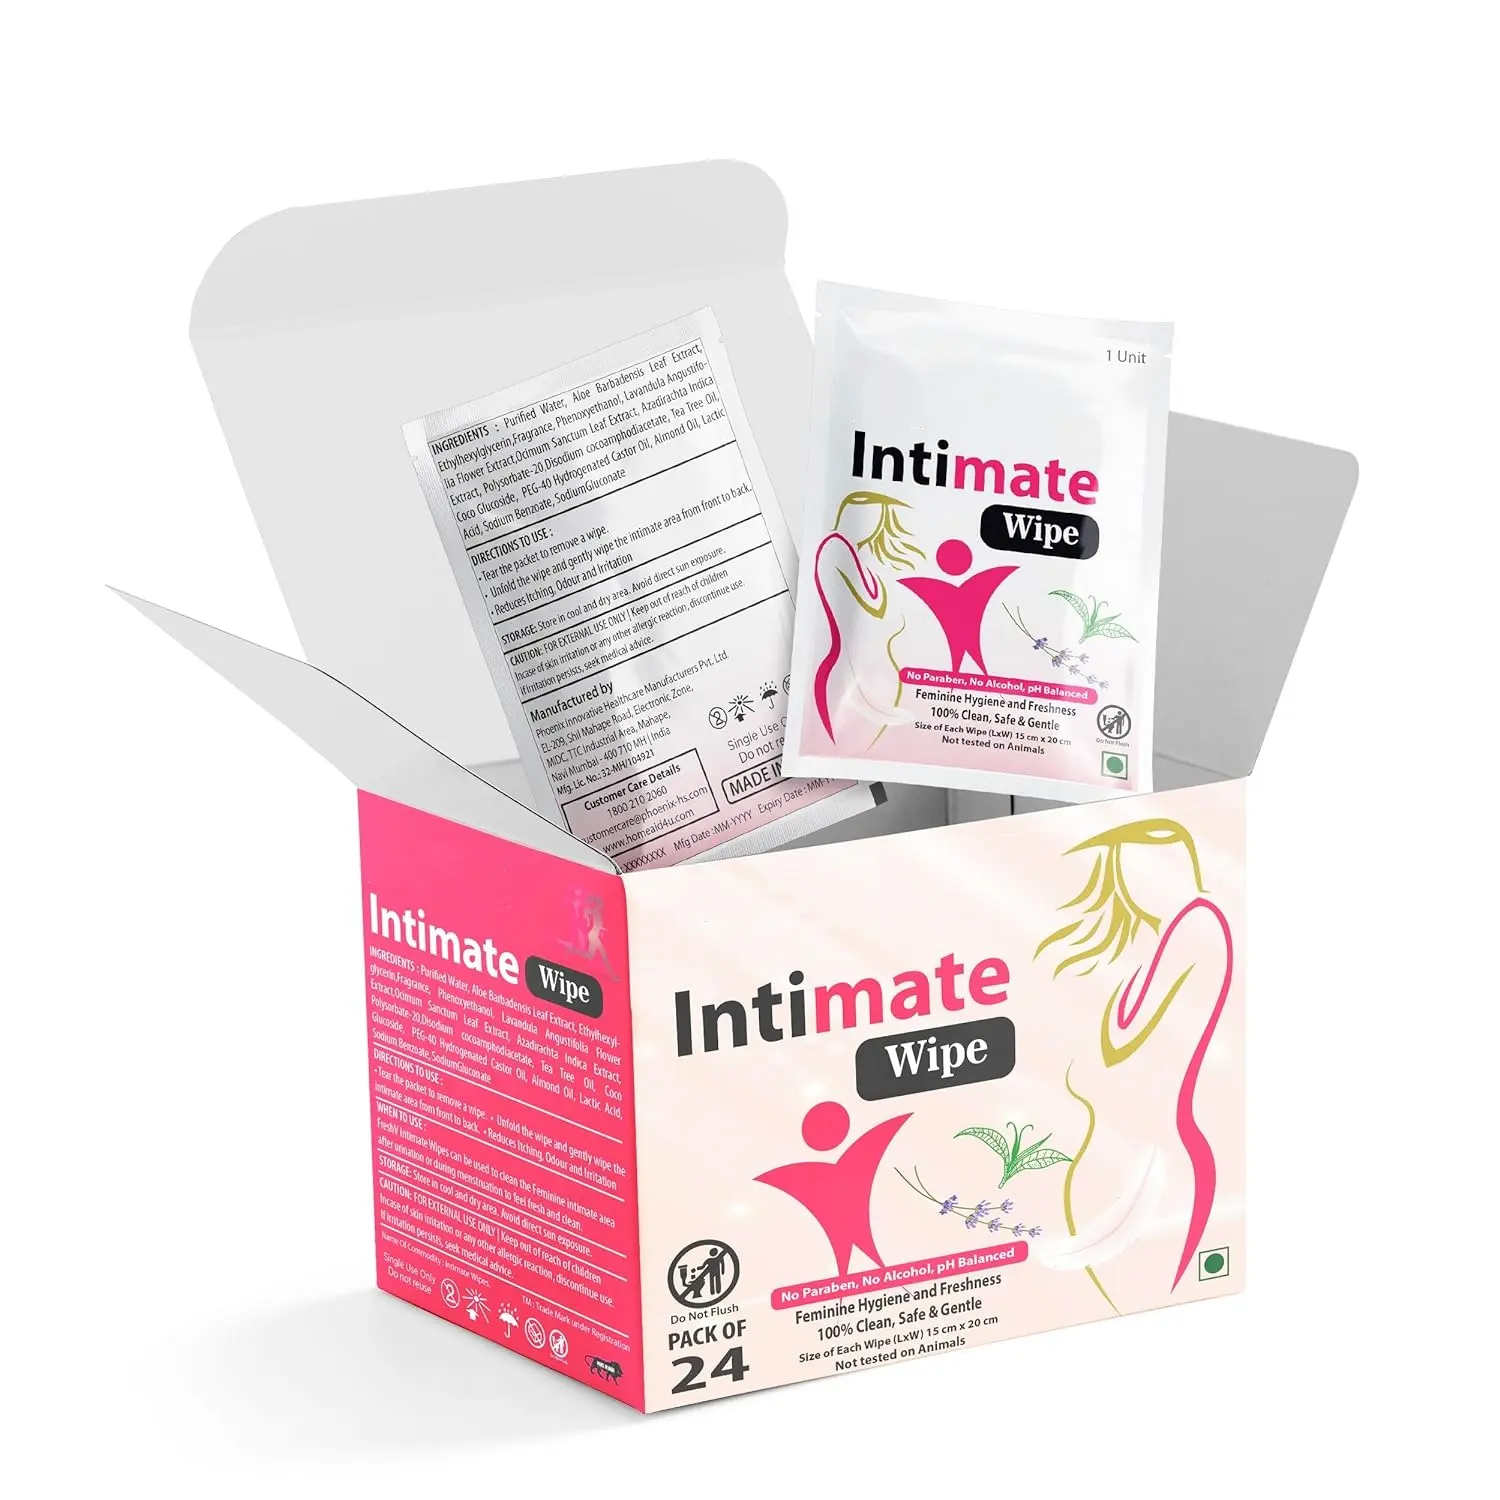 Safe and Gentle Skin Friendly Intimate Wipe 100% Clean PH Balanced Feminine Wipes For Daily Hygiene